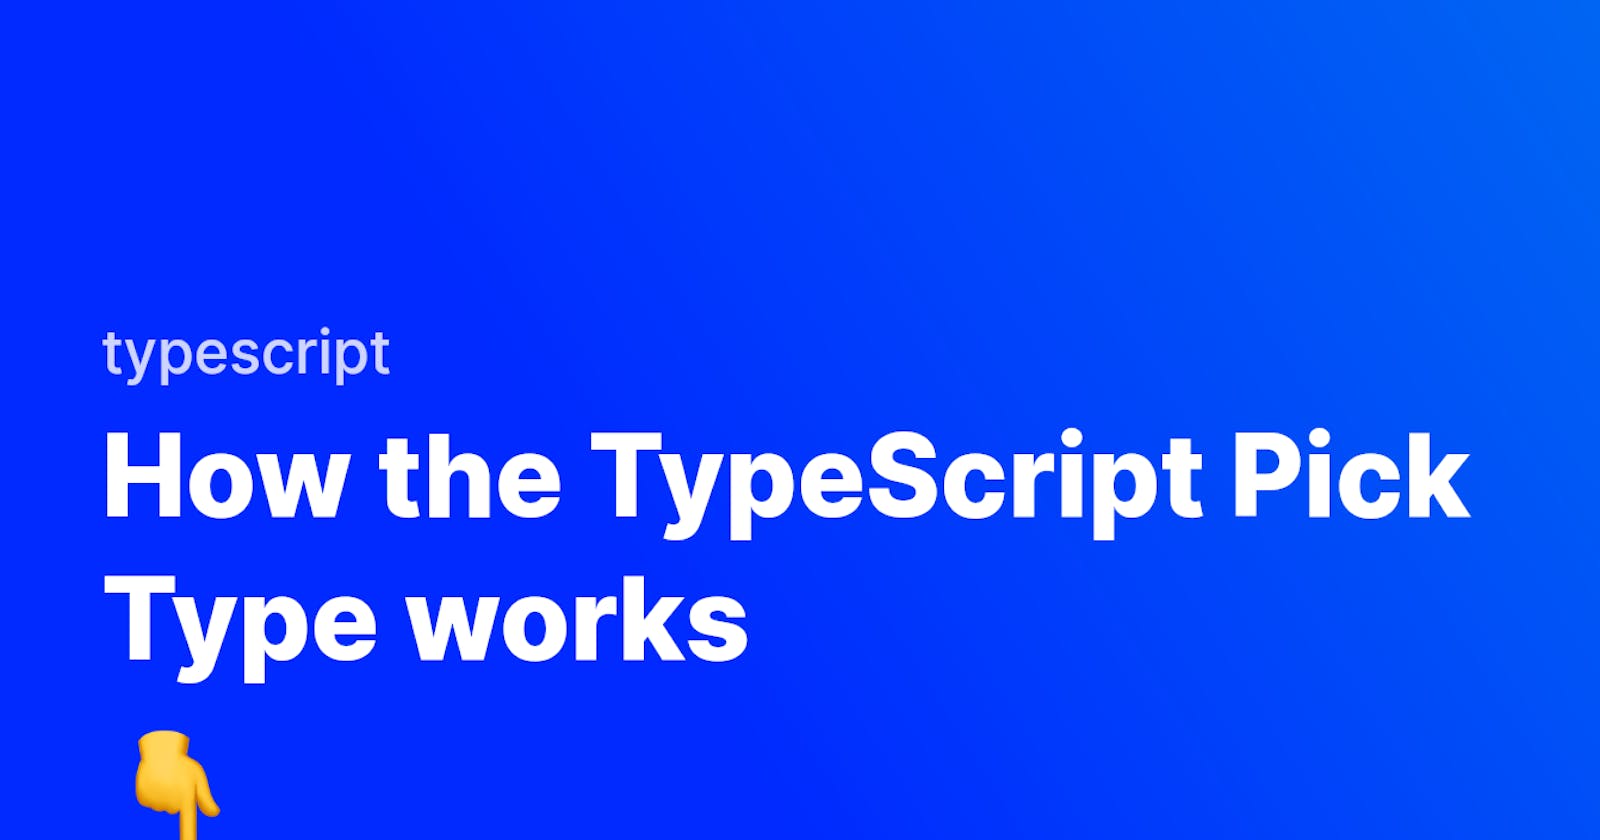 How the TypeScript Pick Type works